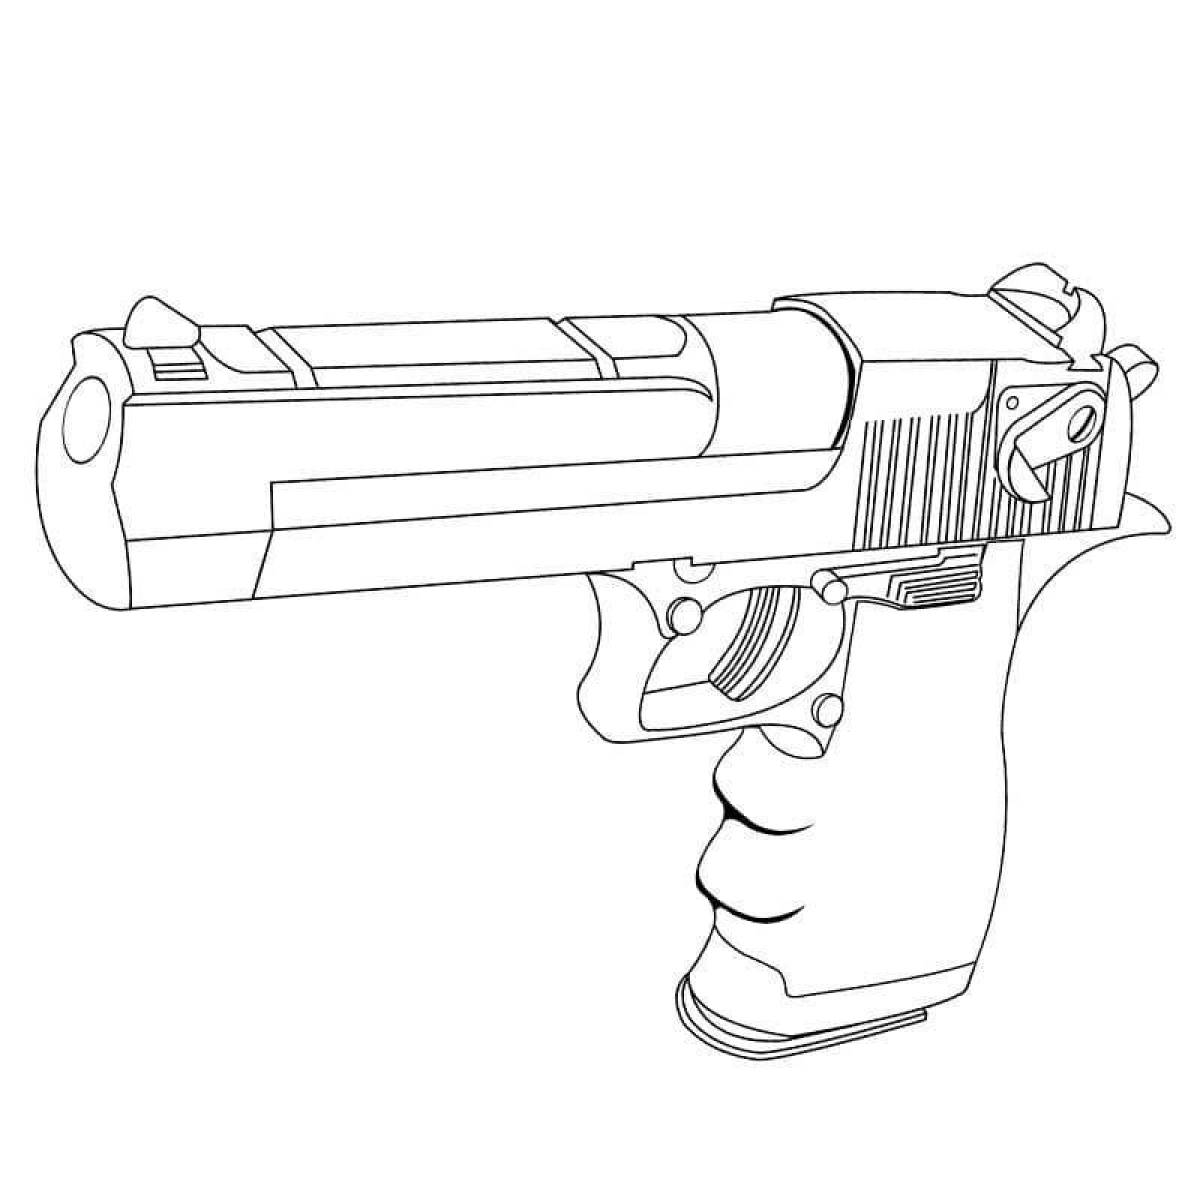 Fine weapon coloring page